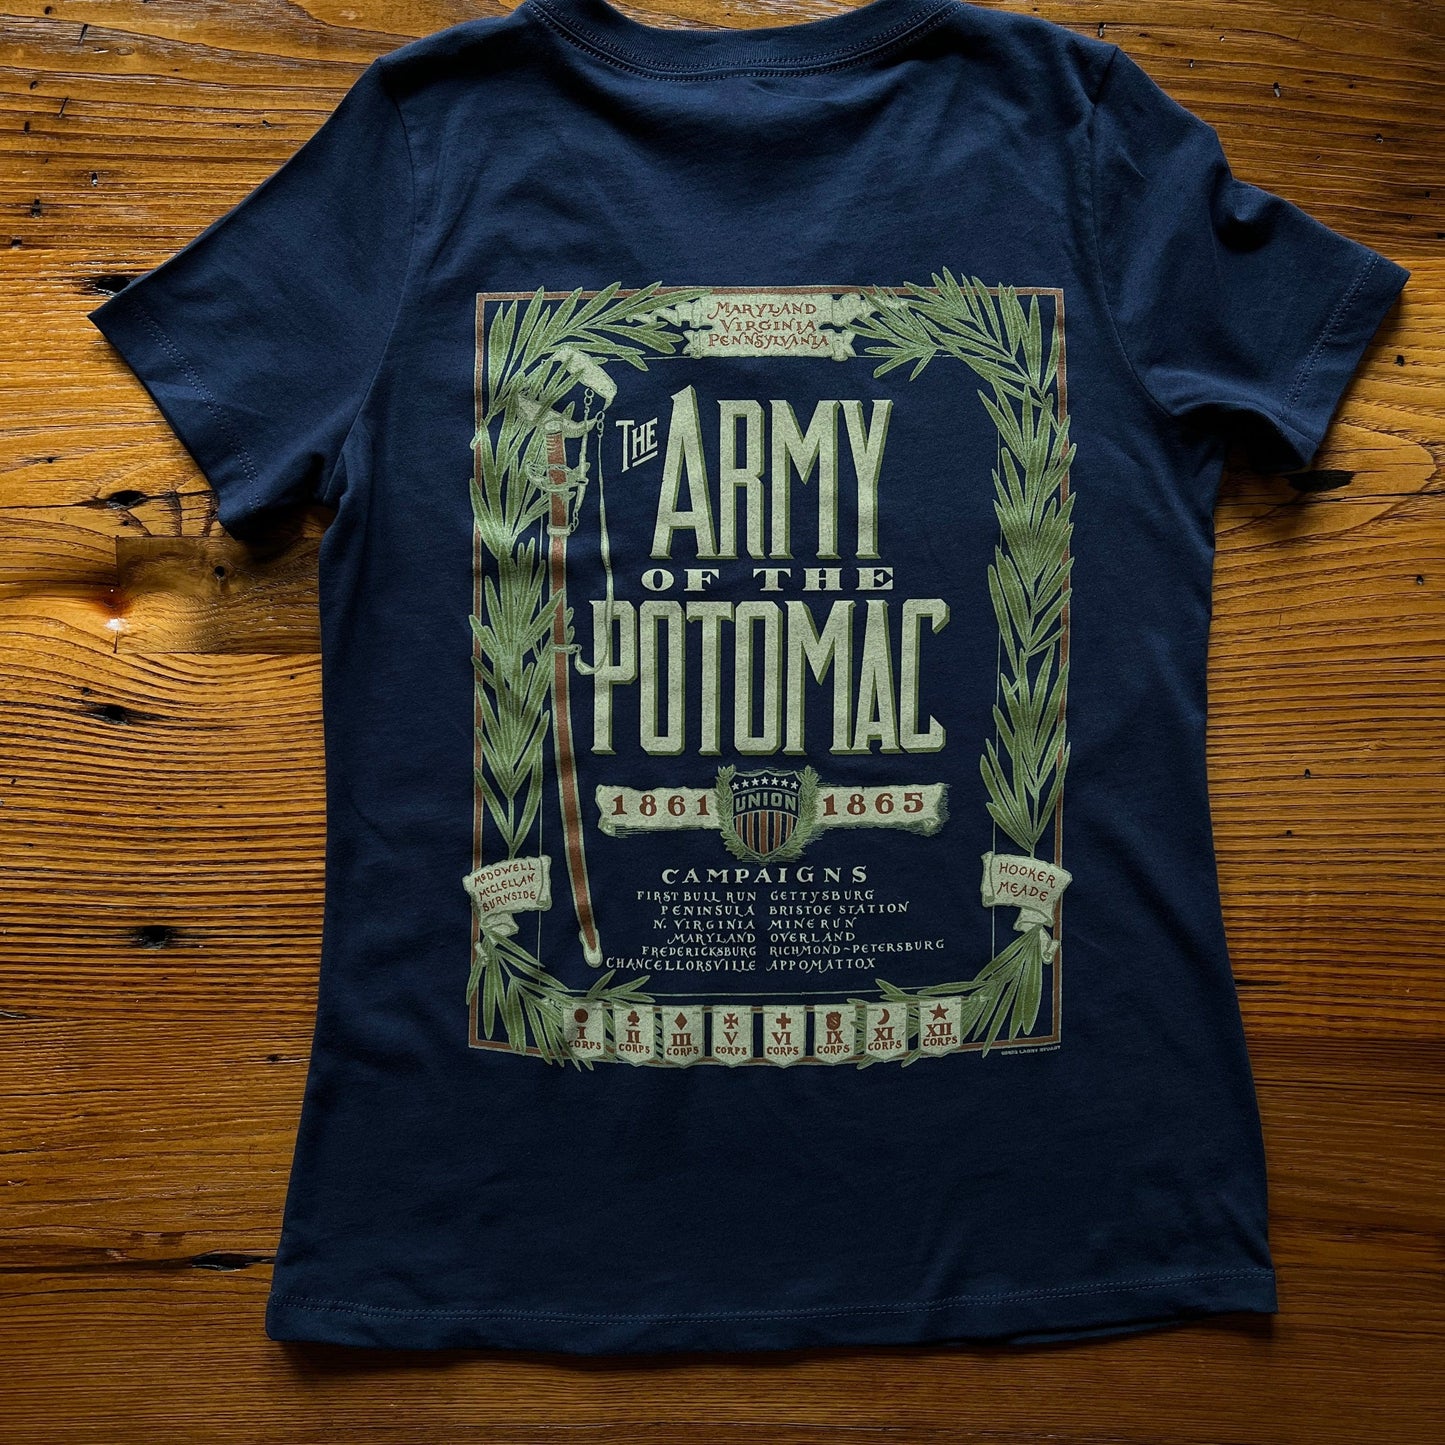 Back of "The Army of the Potomac" Women's V-neck shirt from The History List store